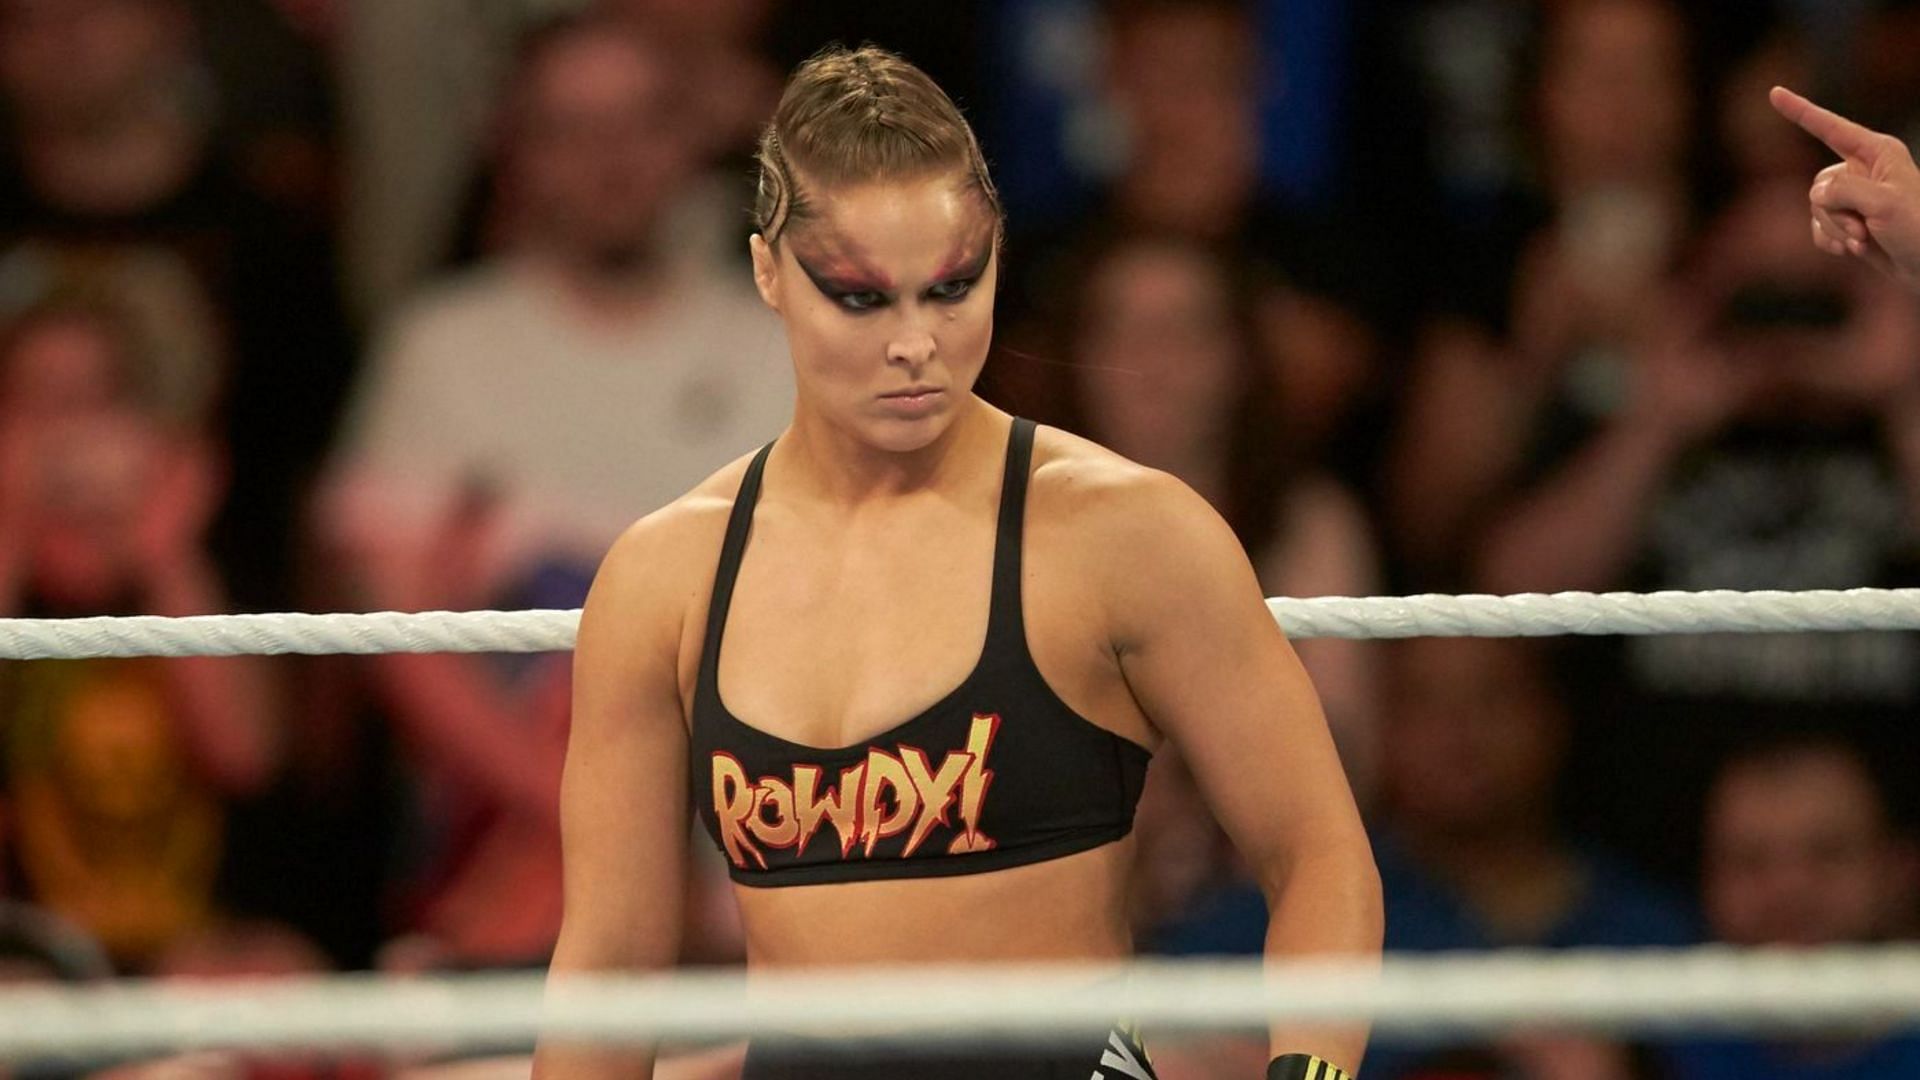 Ronda Rousey never defeated Becky Lynch one-on-one